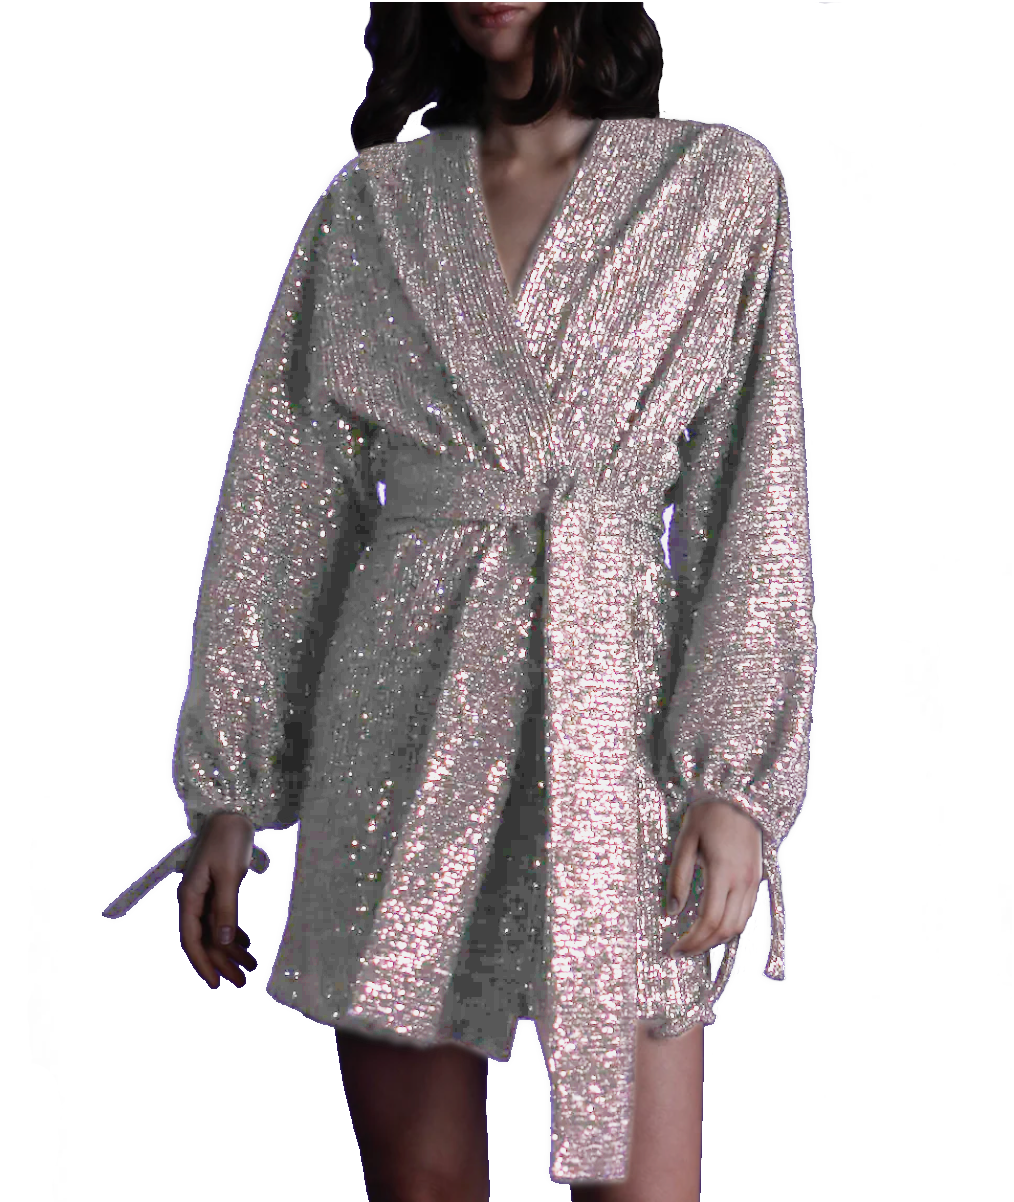 ELVIRA - short dress with wide sleeve and sash in silver sequin lo